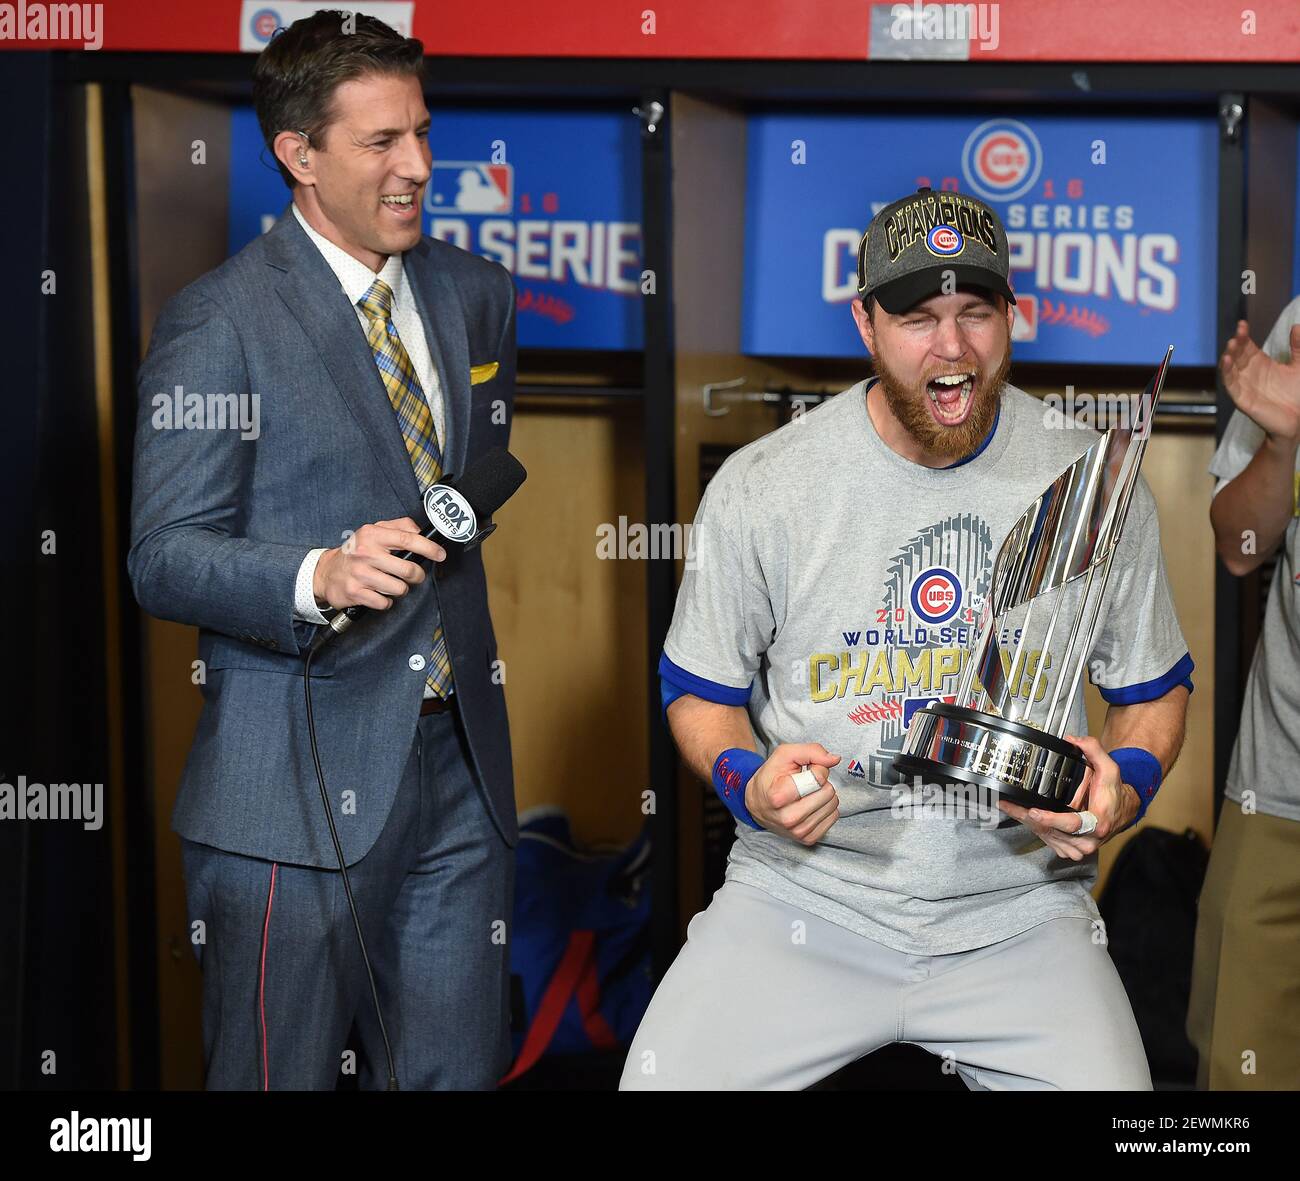 CLEVELAND, OH - NOVEMBER 2: Fox Sports Kevin Burkhardt with 2016 World  Series MVP Ben Zobrist #18 of the Chicago Cubs with The Commissioner's  Trophy following at Game 7 of the 2016